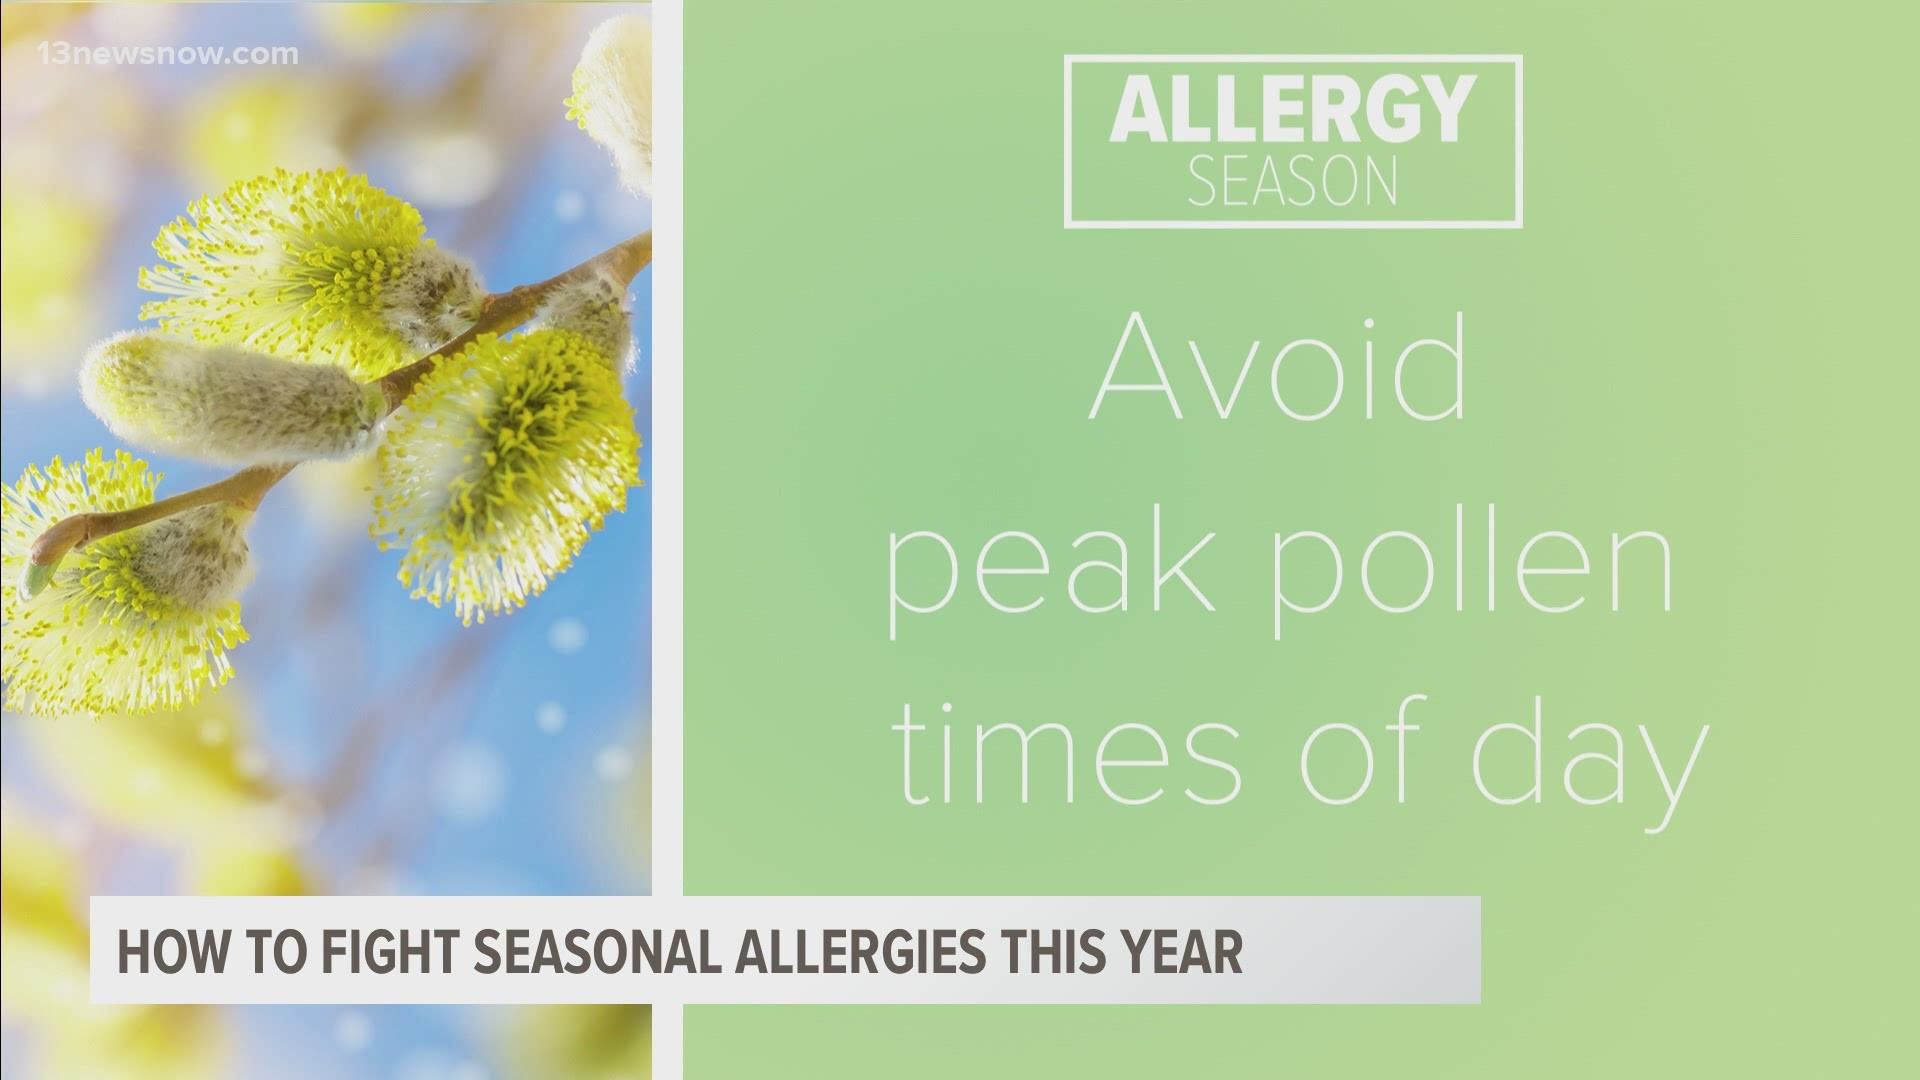 Meteorologist Payton Domschke gives tips on how to deal with seasonal allergies while COVID-19 is still a concern.